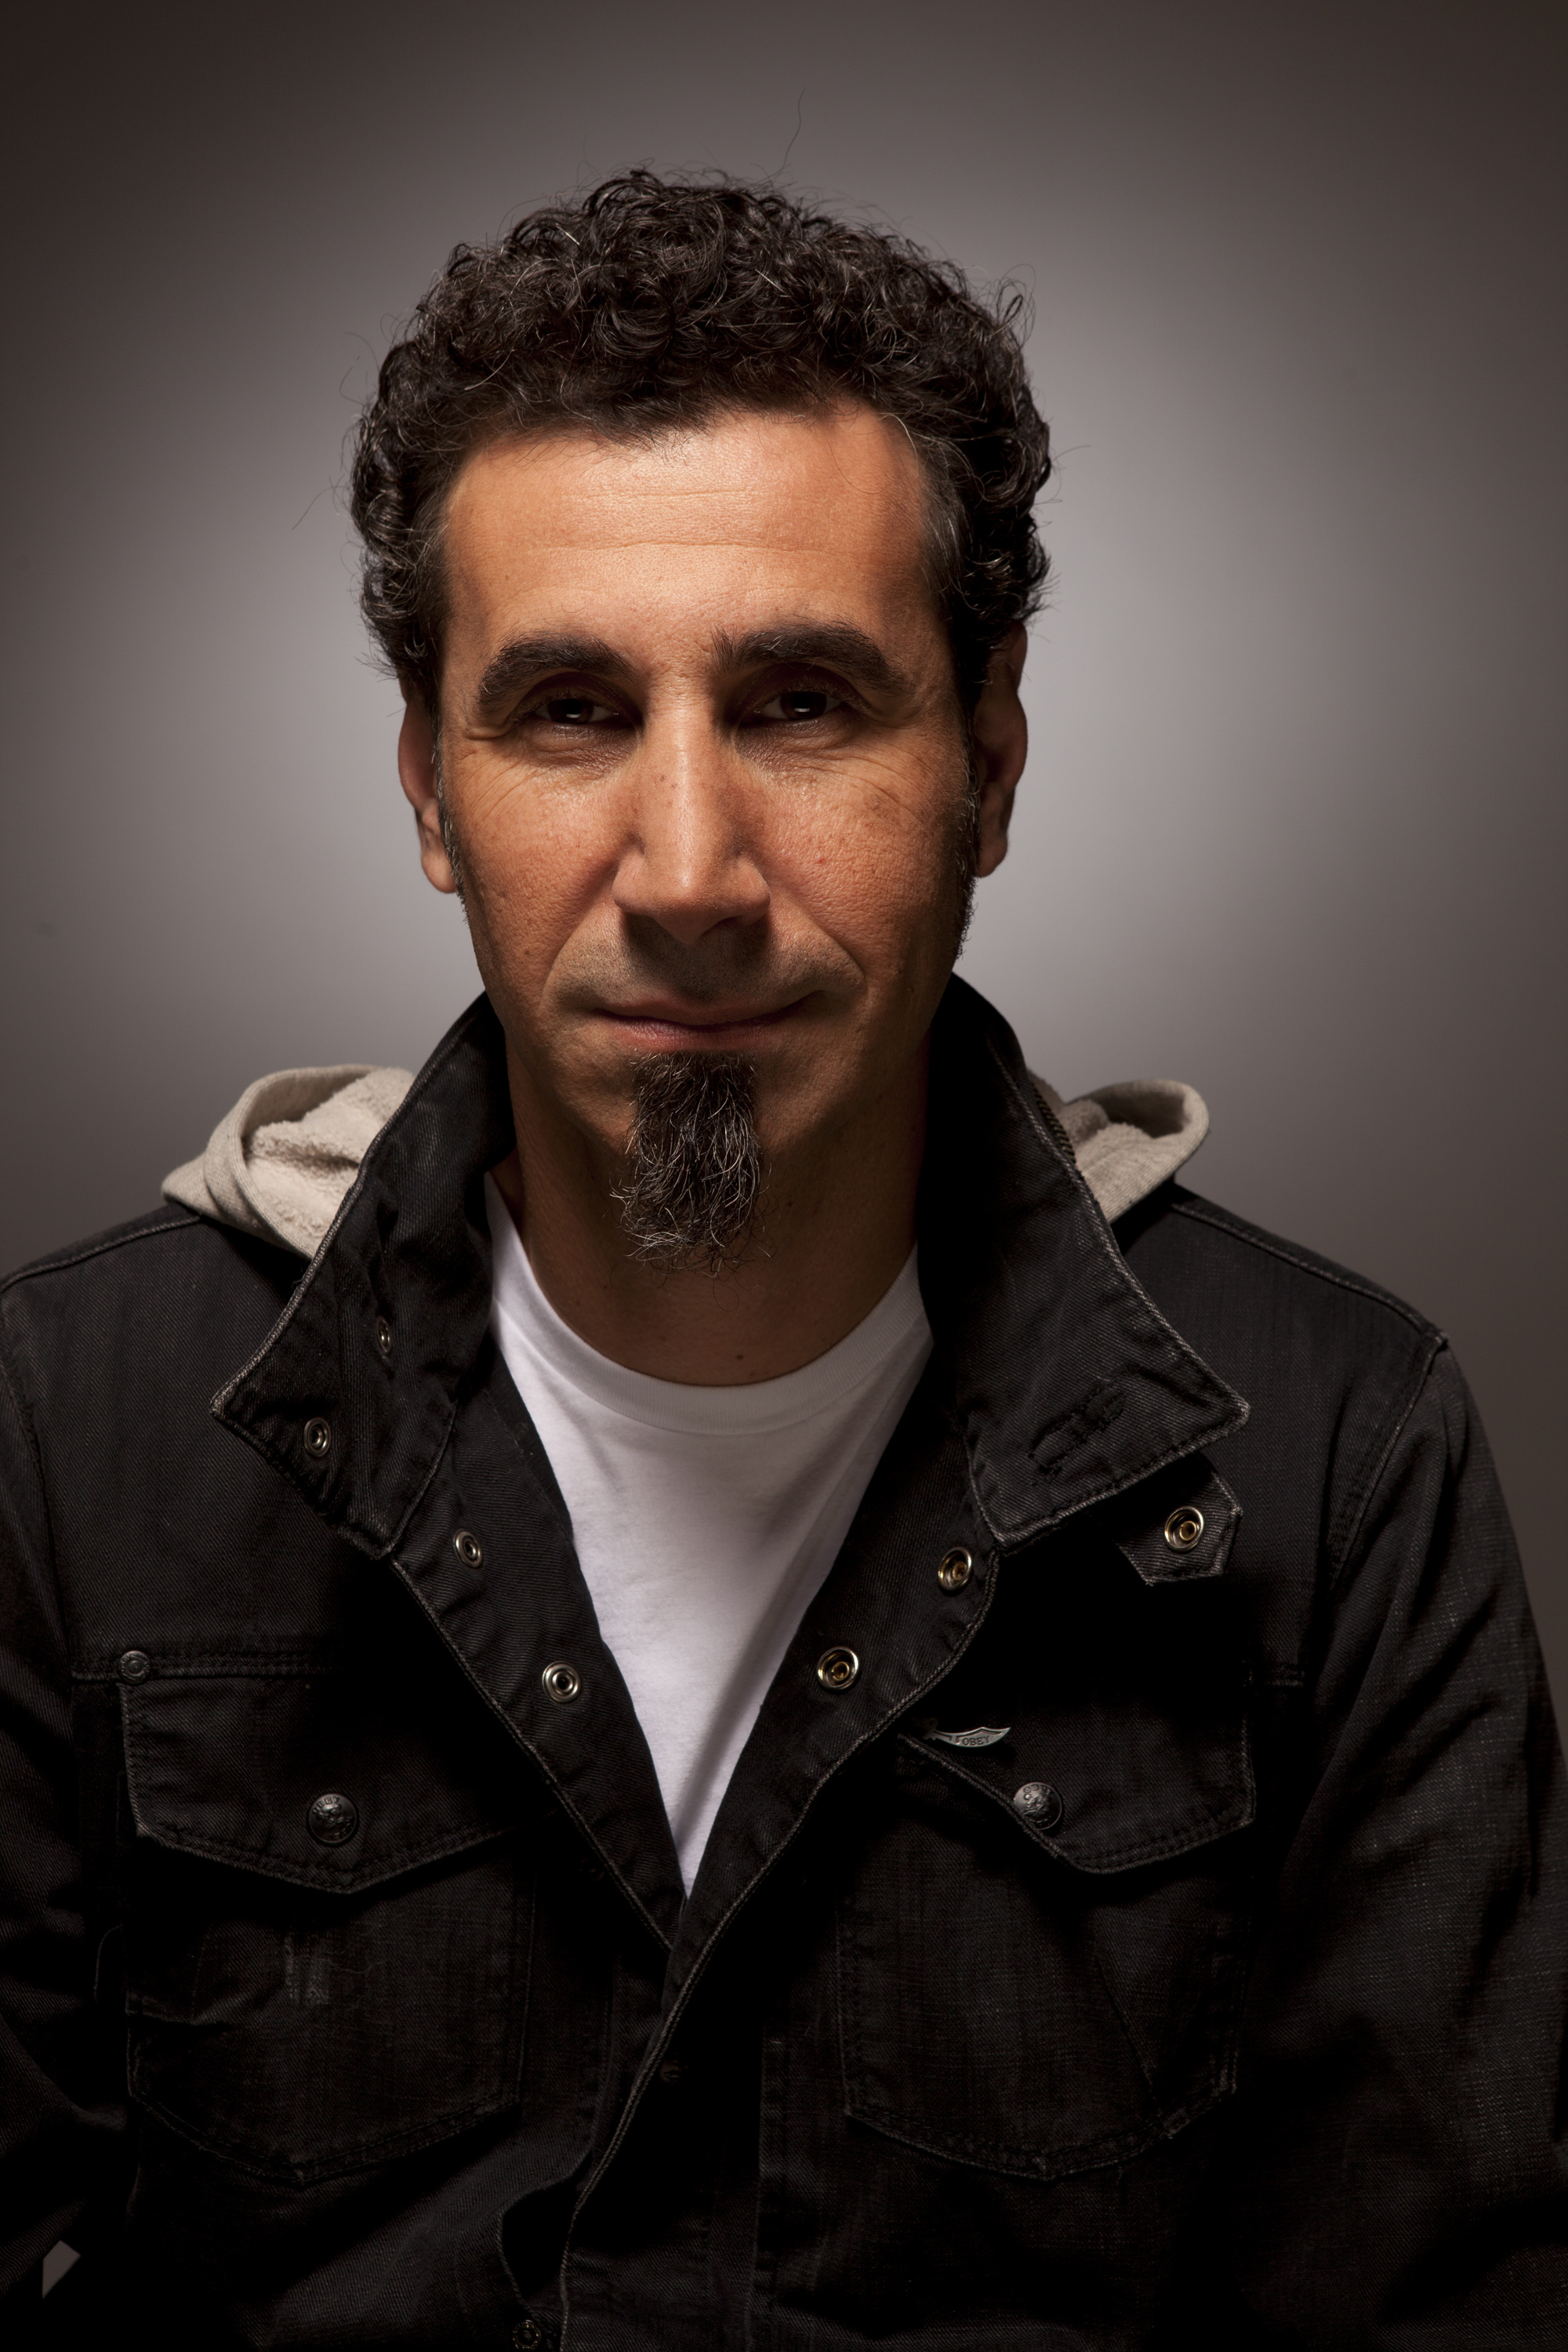 Free download SERJ TANKIAN WALLPAPERS FREE Wallpapers Background images for your Desktop, Mobile \u0026 Tablet | Explore 76+ Serj Tankian Wallpaper | Serj Tankian Wallpaper 2000x3000